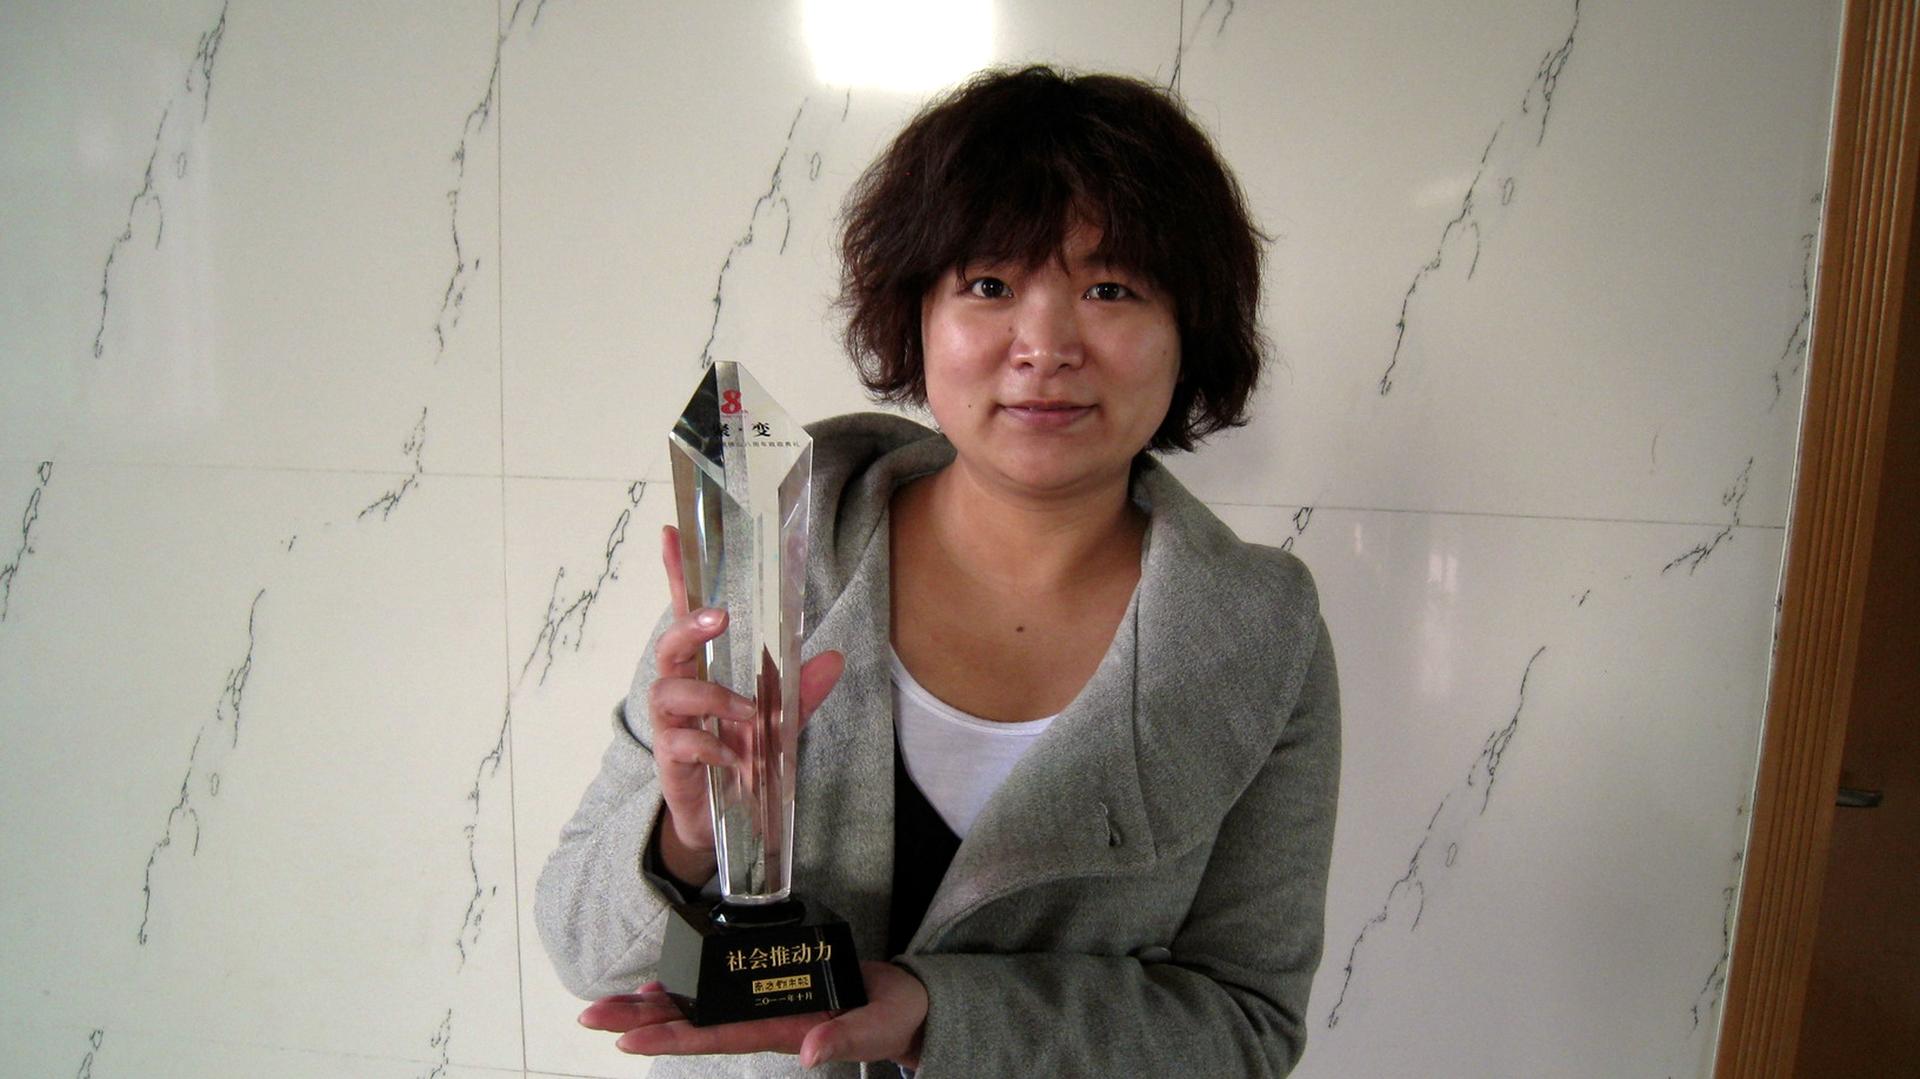 Women’s rights activist Wu Rongrong poses with a trophy in this undated picture taken in an unknown location in China, provided by a women's rights group on April 8, 2015.